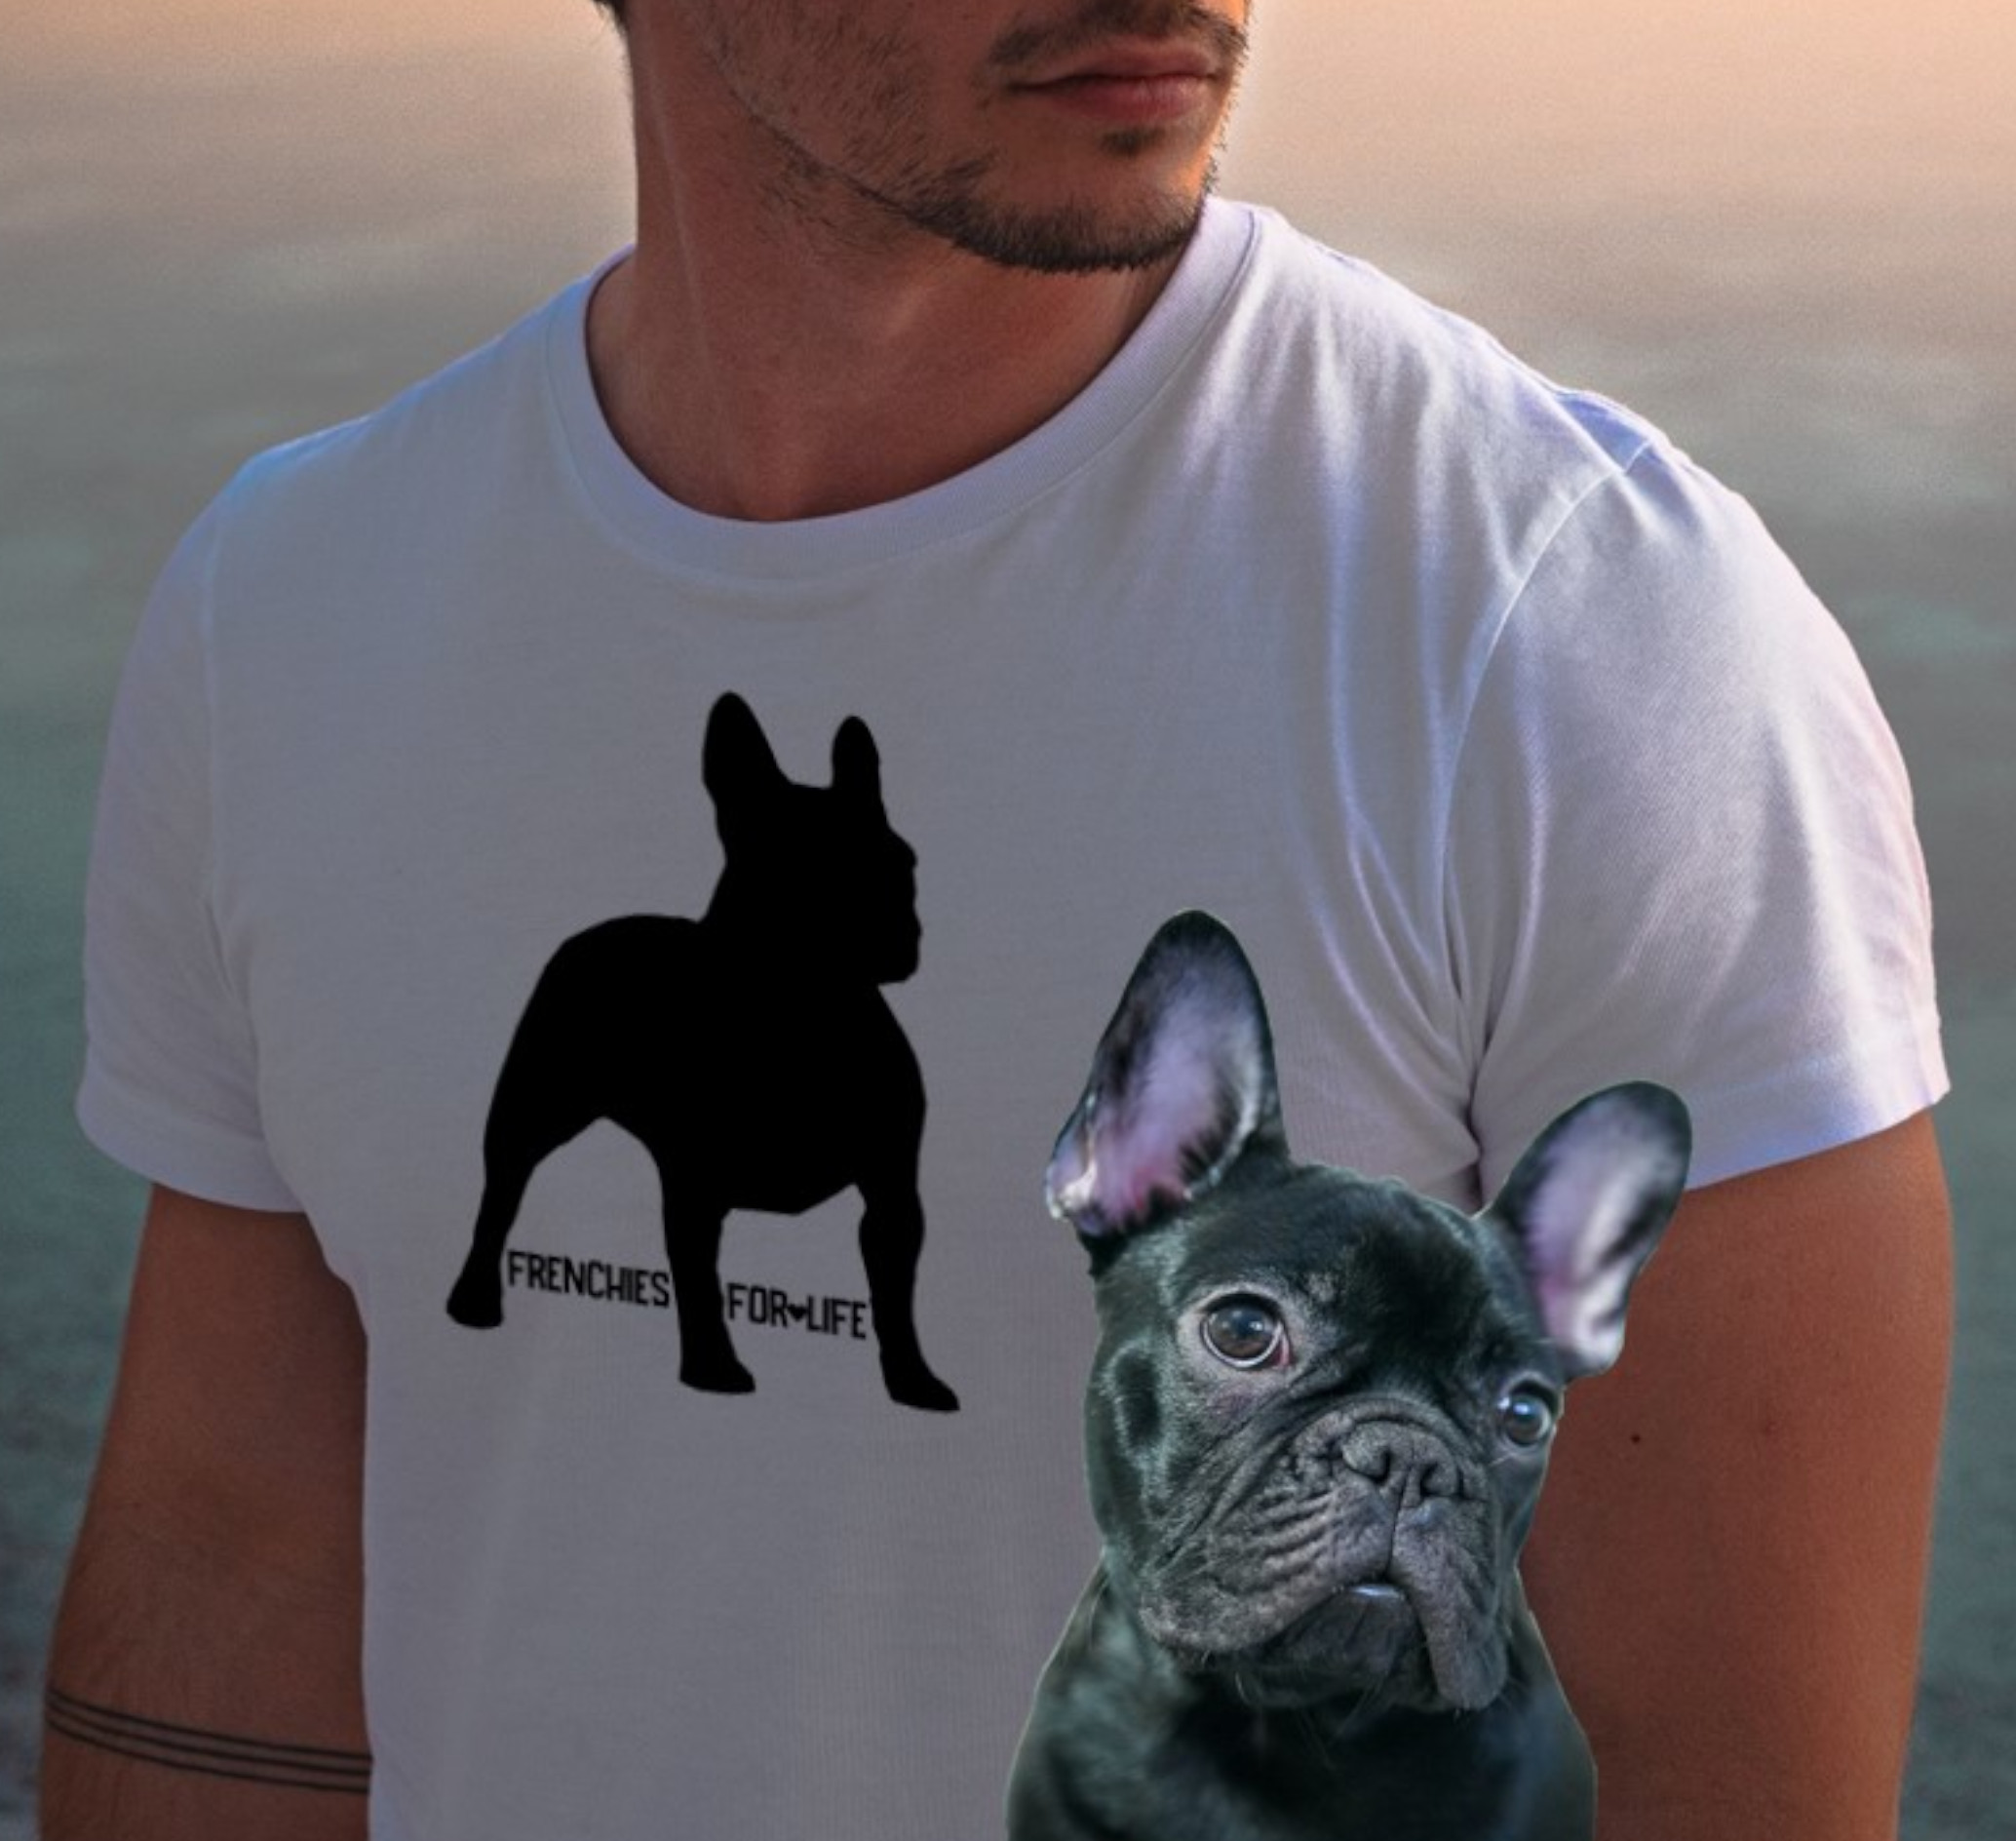 A man modeling a white t-shirt with the frenchie graphic print design.